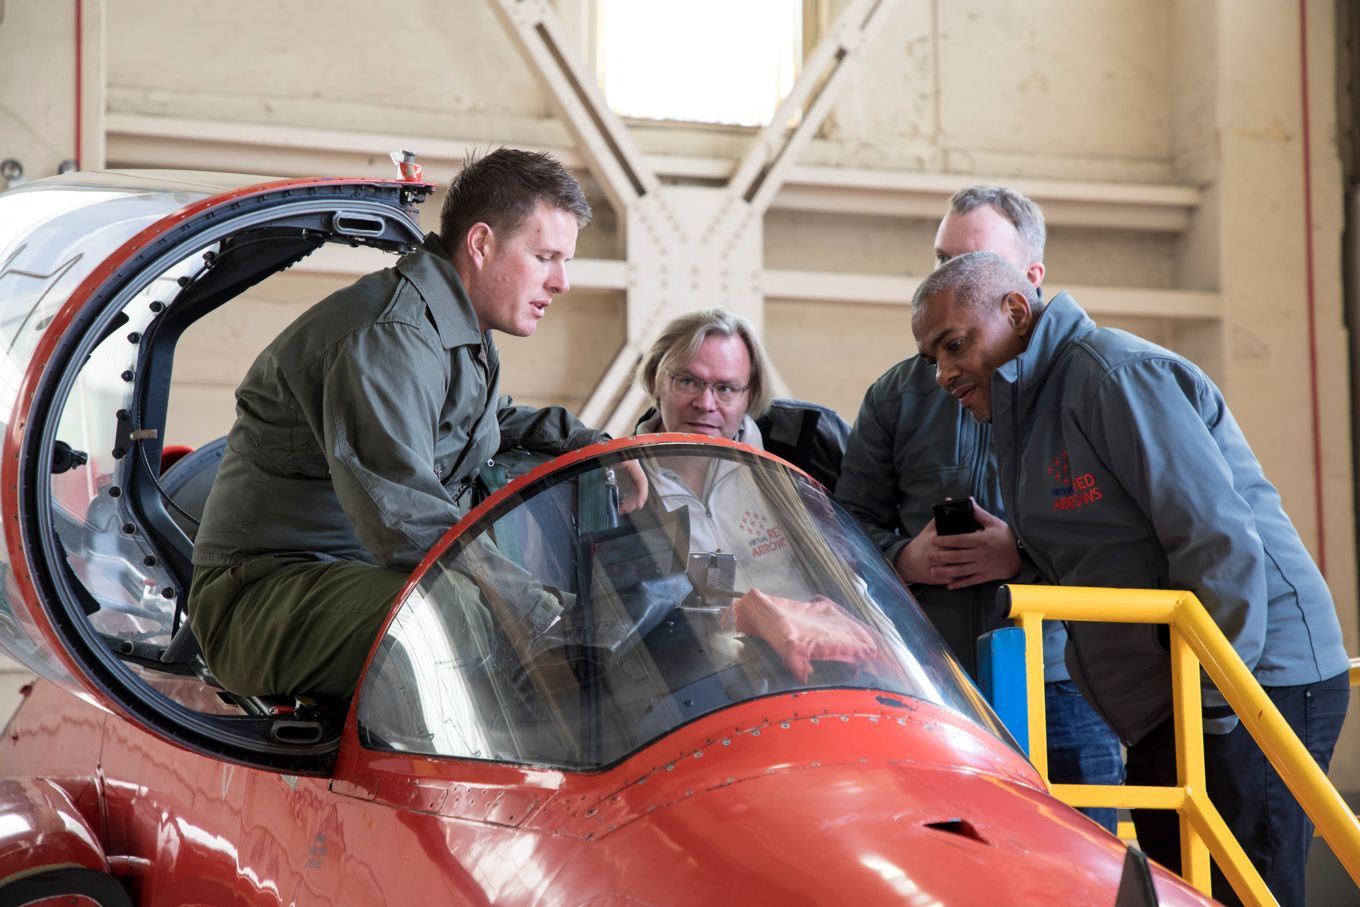 Members of the Virtual Red Arrows team talking with the Red Arrows groundcrew.